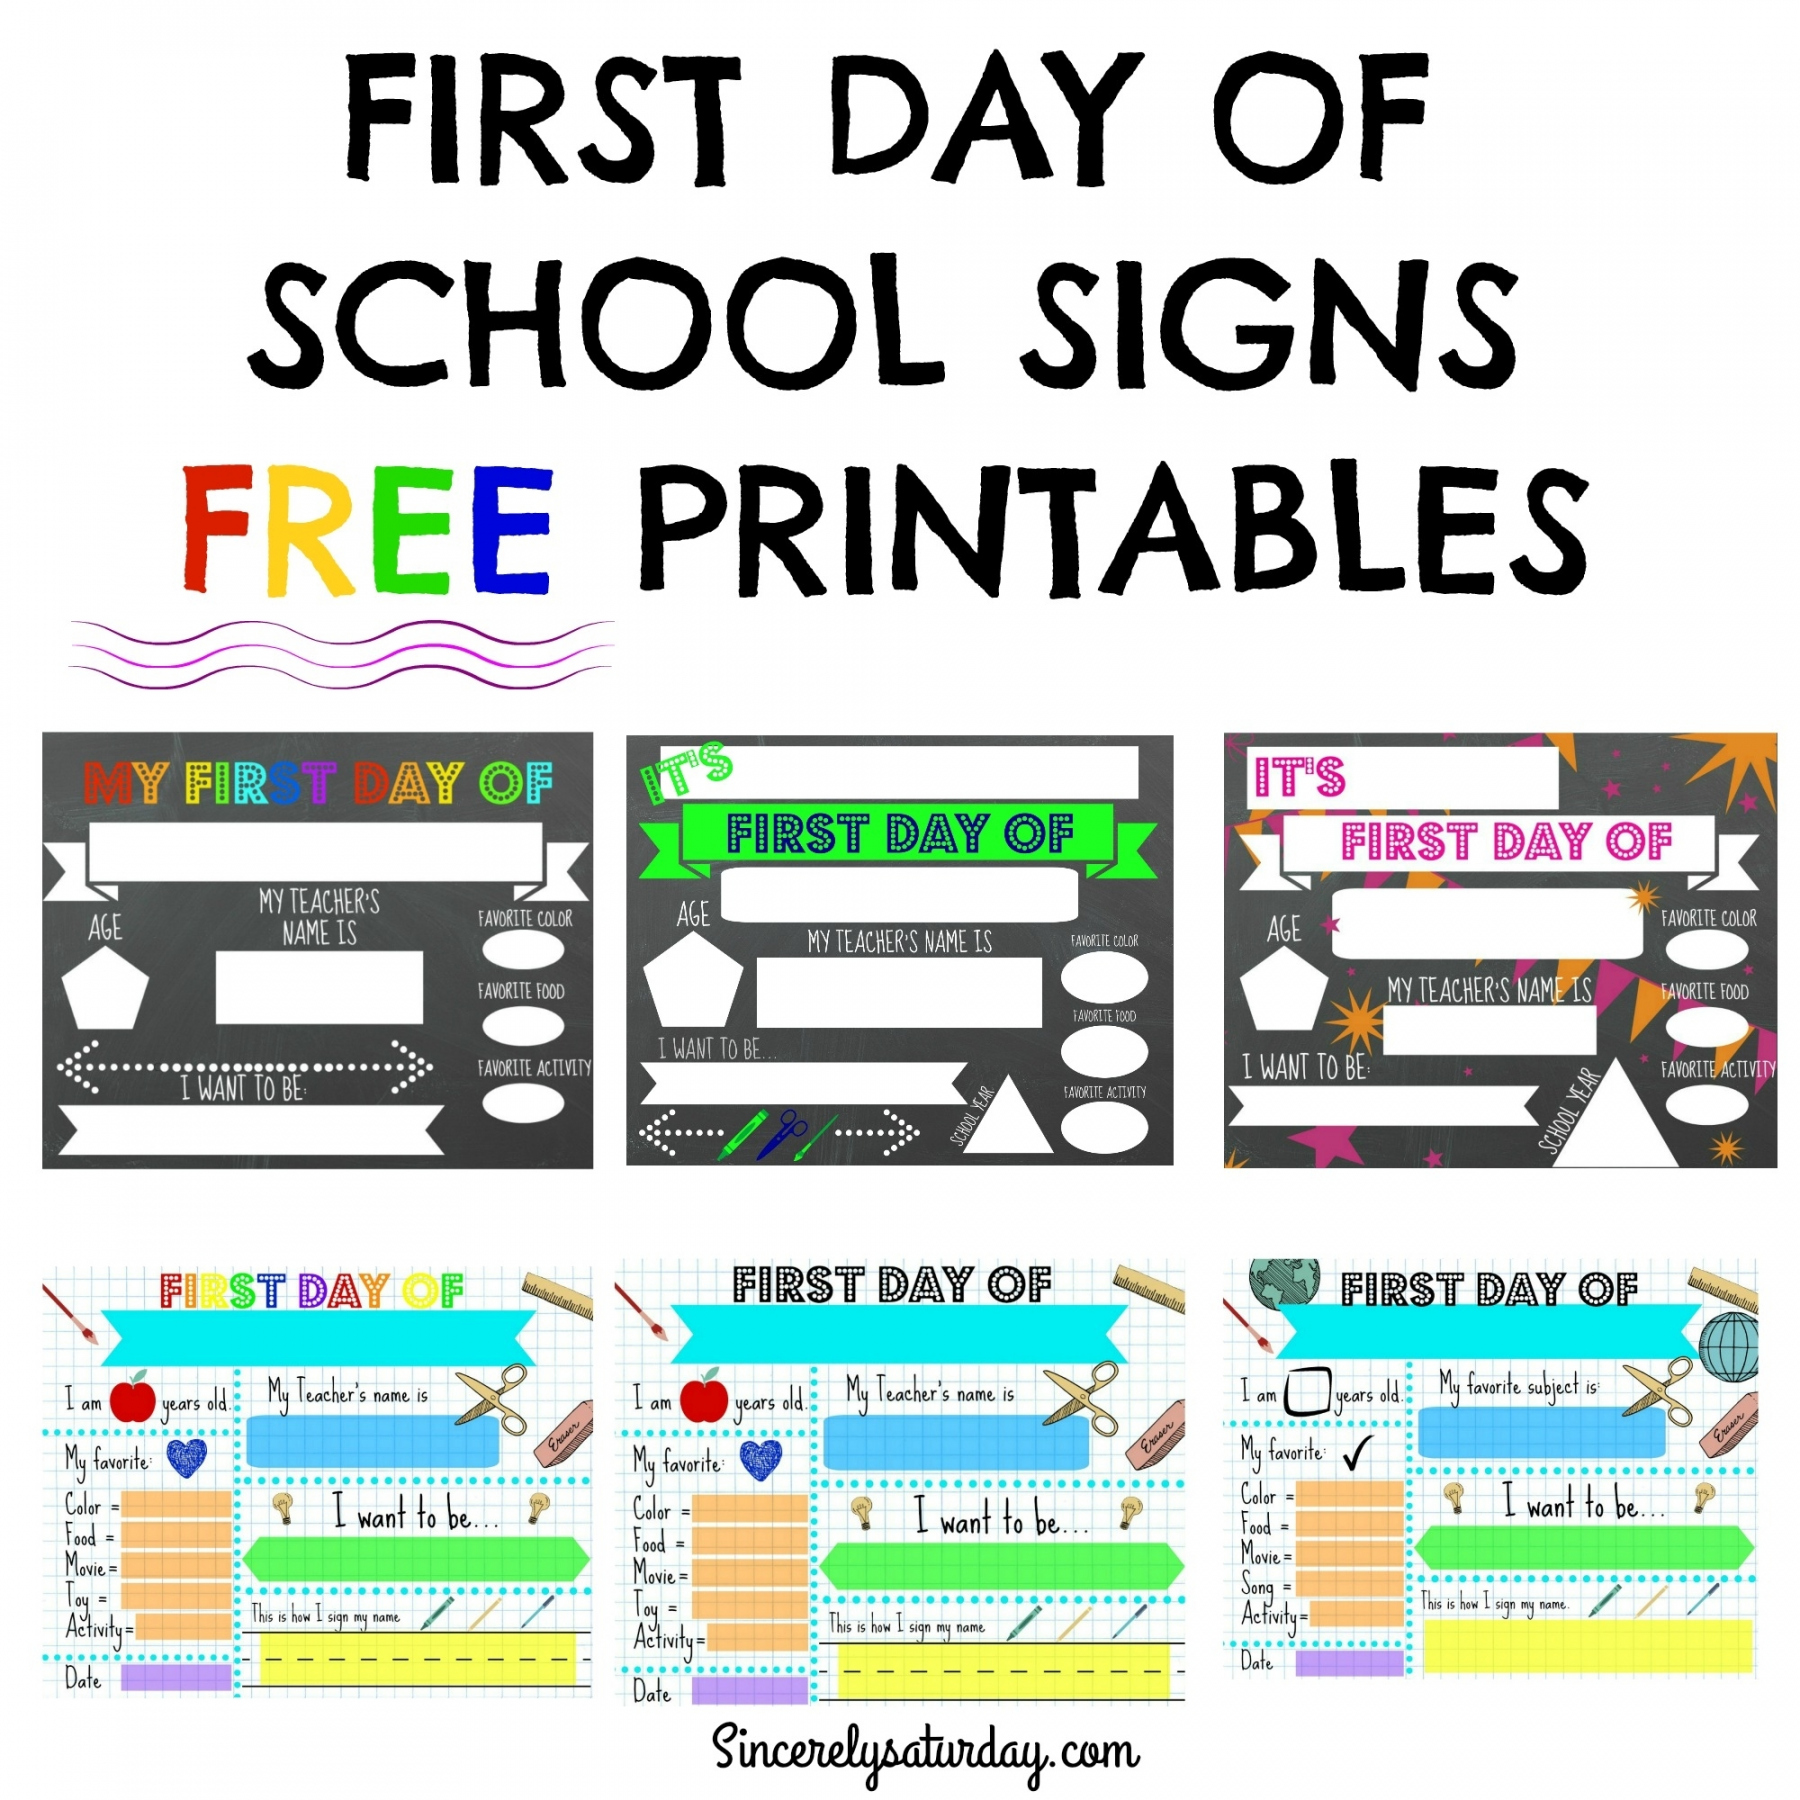 Free Printable First Day of School Sign - Printable - FREE PRINTABLE FIRST DAY OF SCHOOL SIGNS - Sincerely Saturday